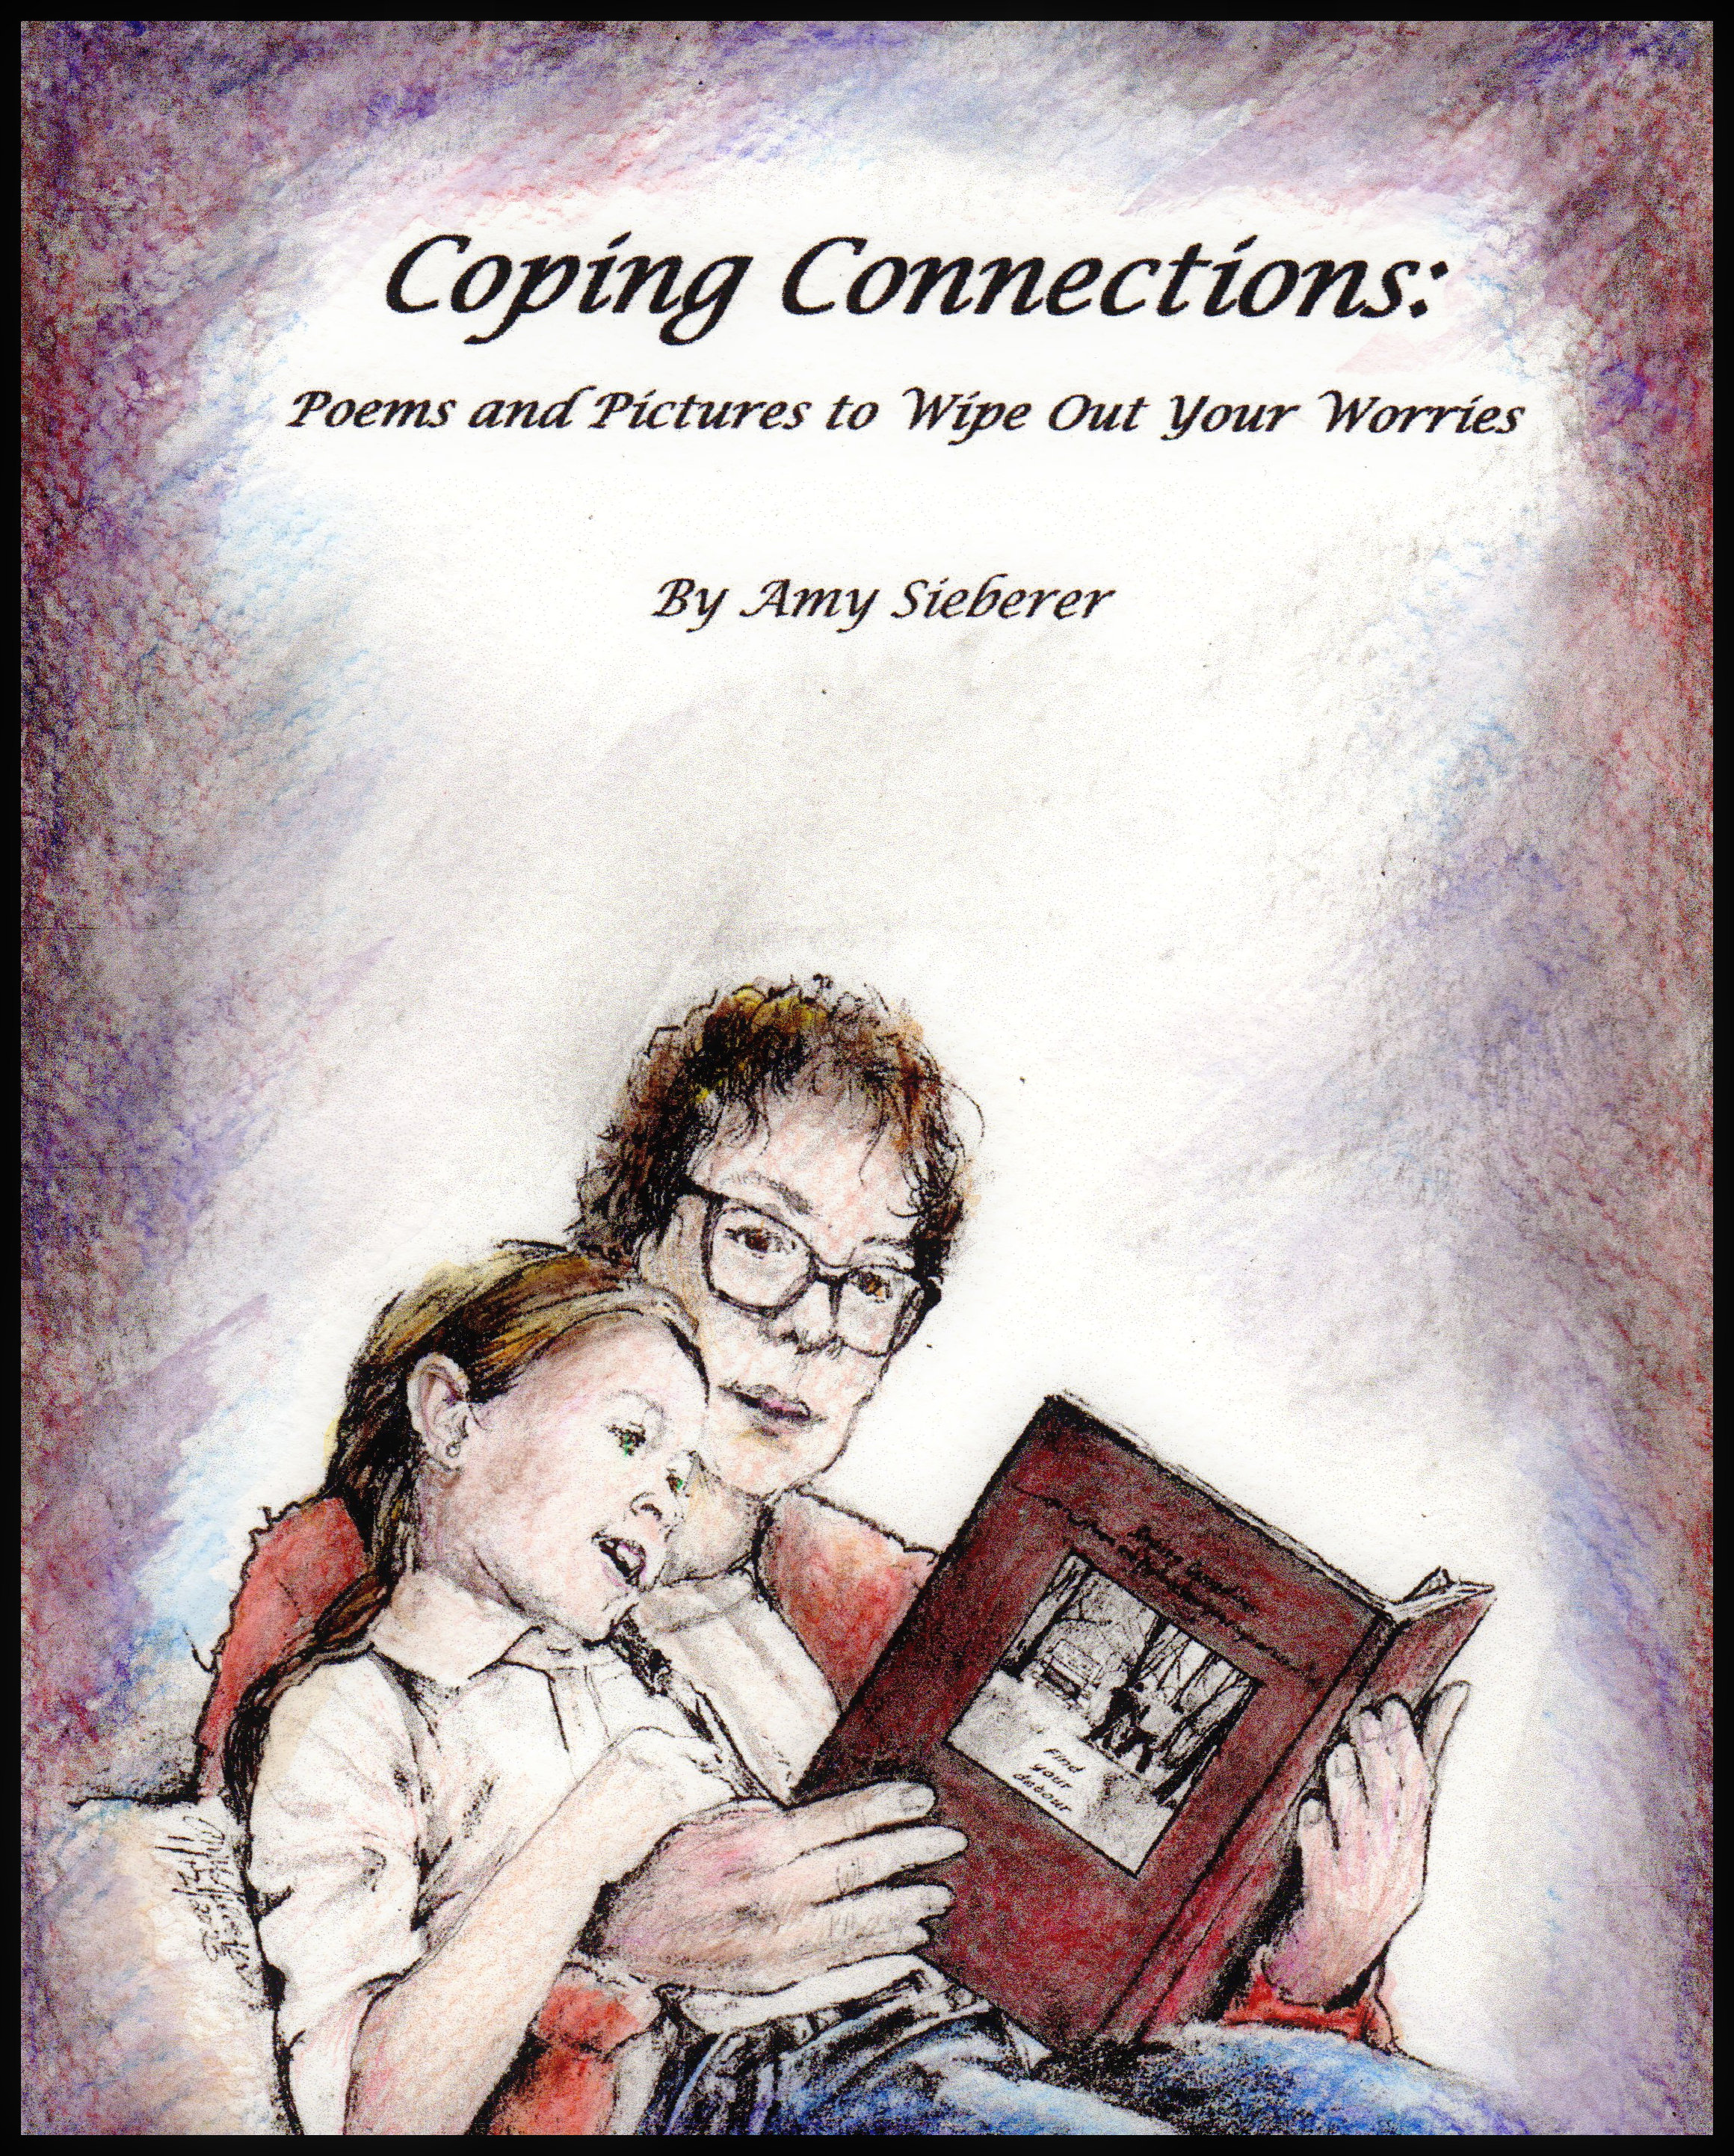 Coping Connections